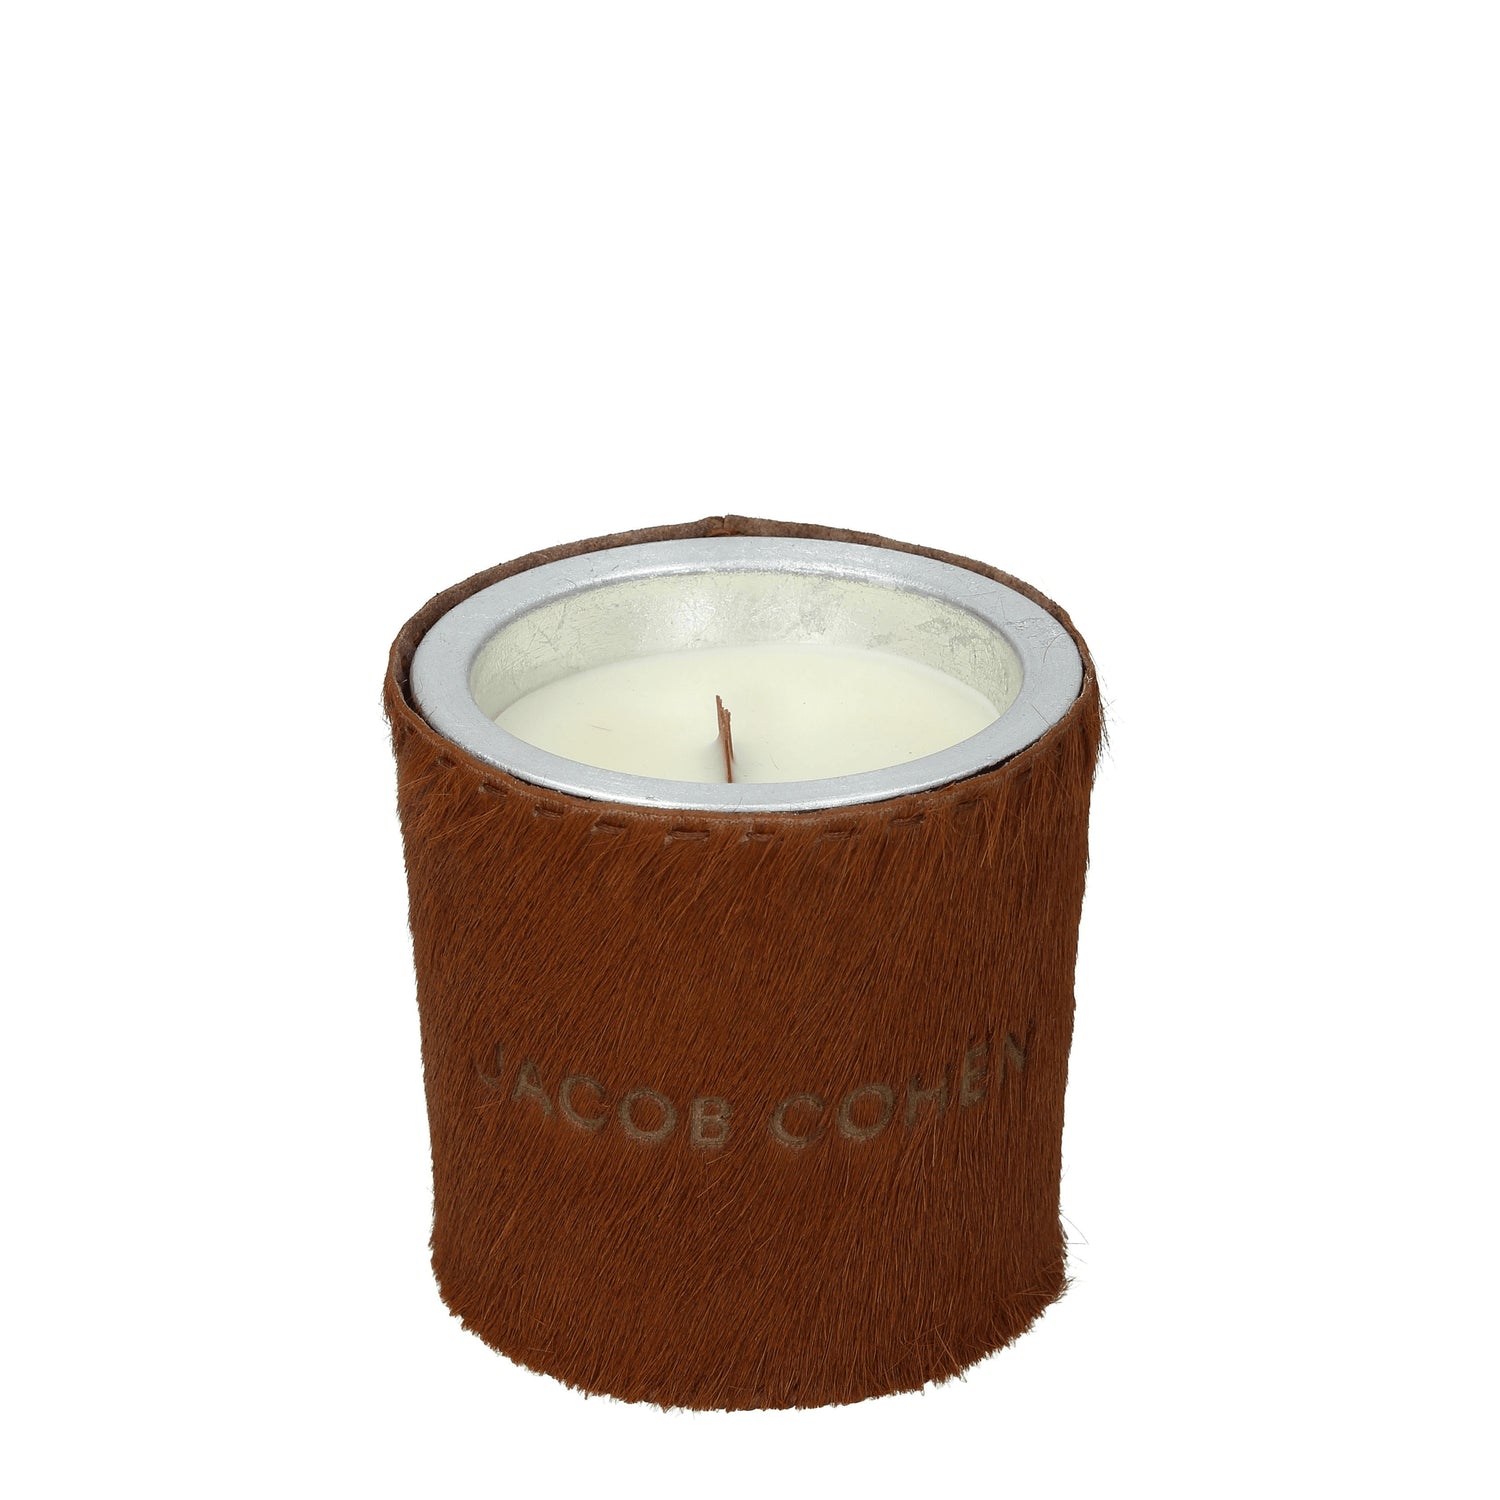 Jacob Cohen Idee Regalo handmade scented soy candle Donna Cavallino Marrone Tabacco